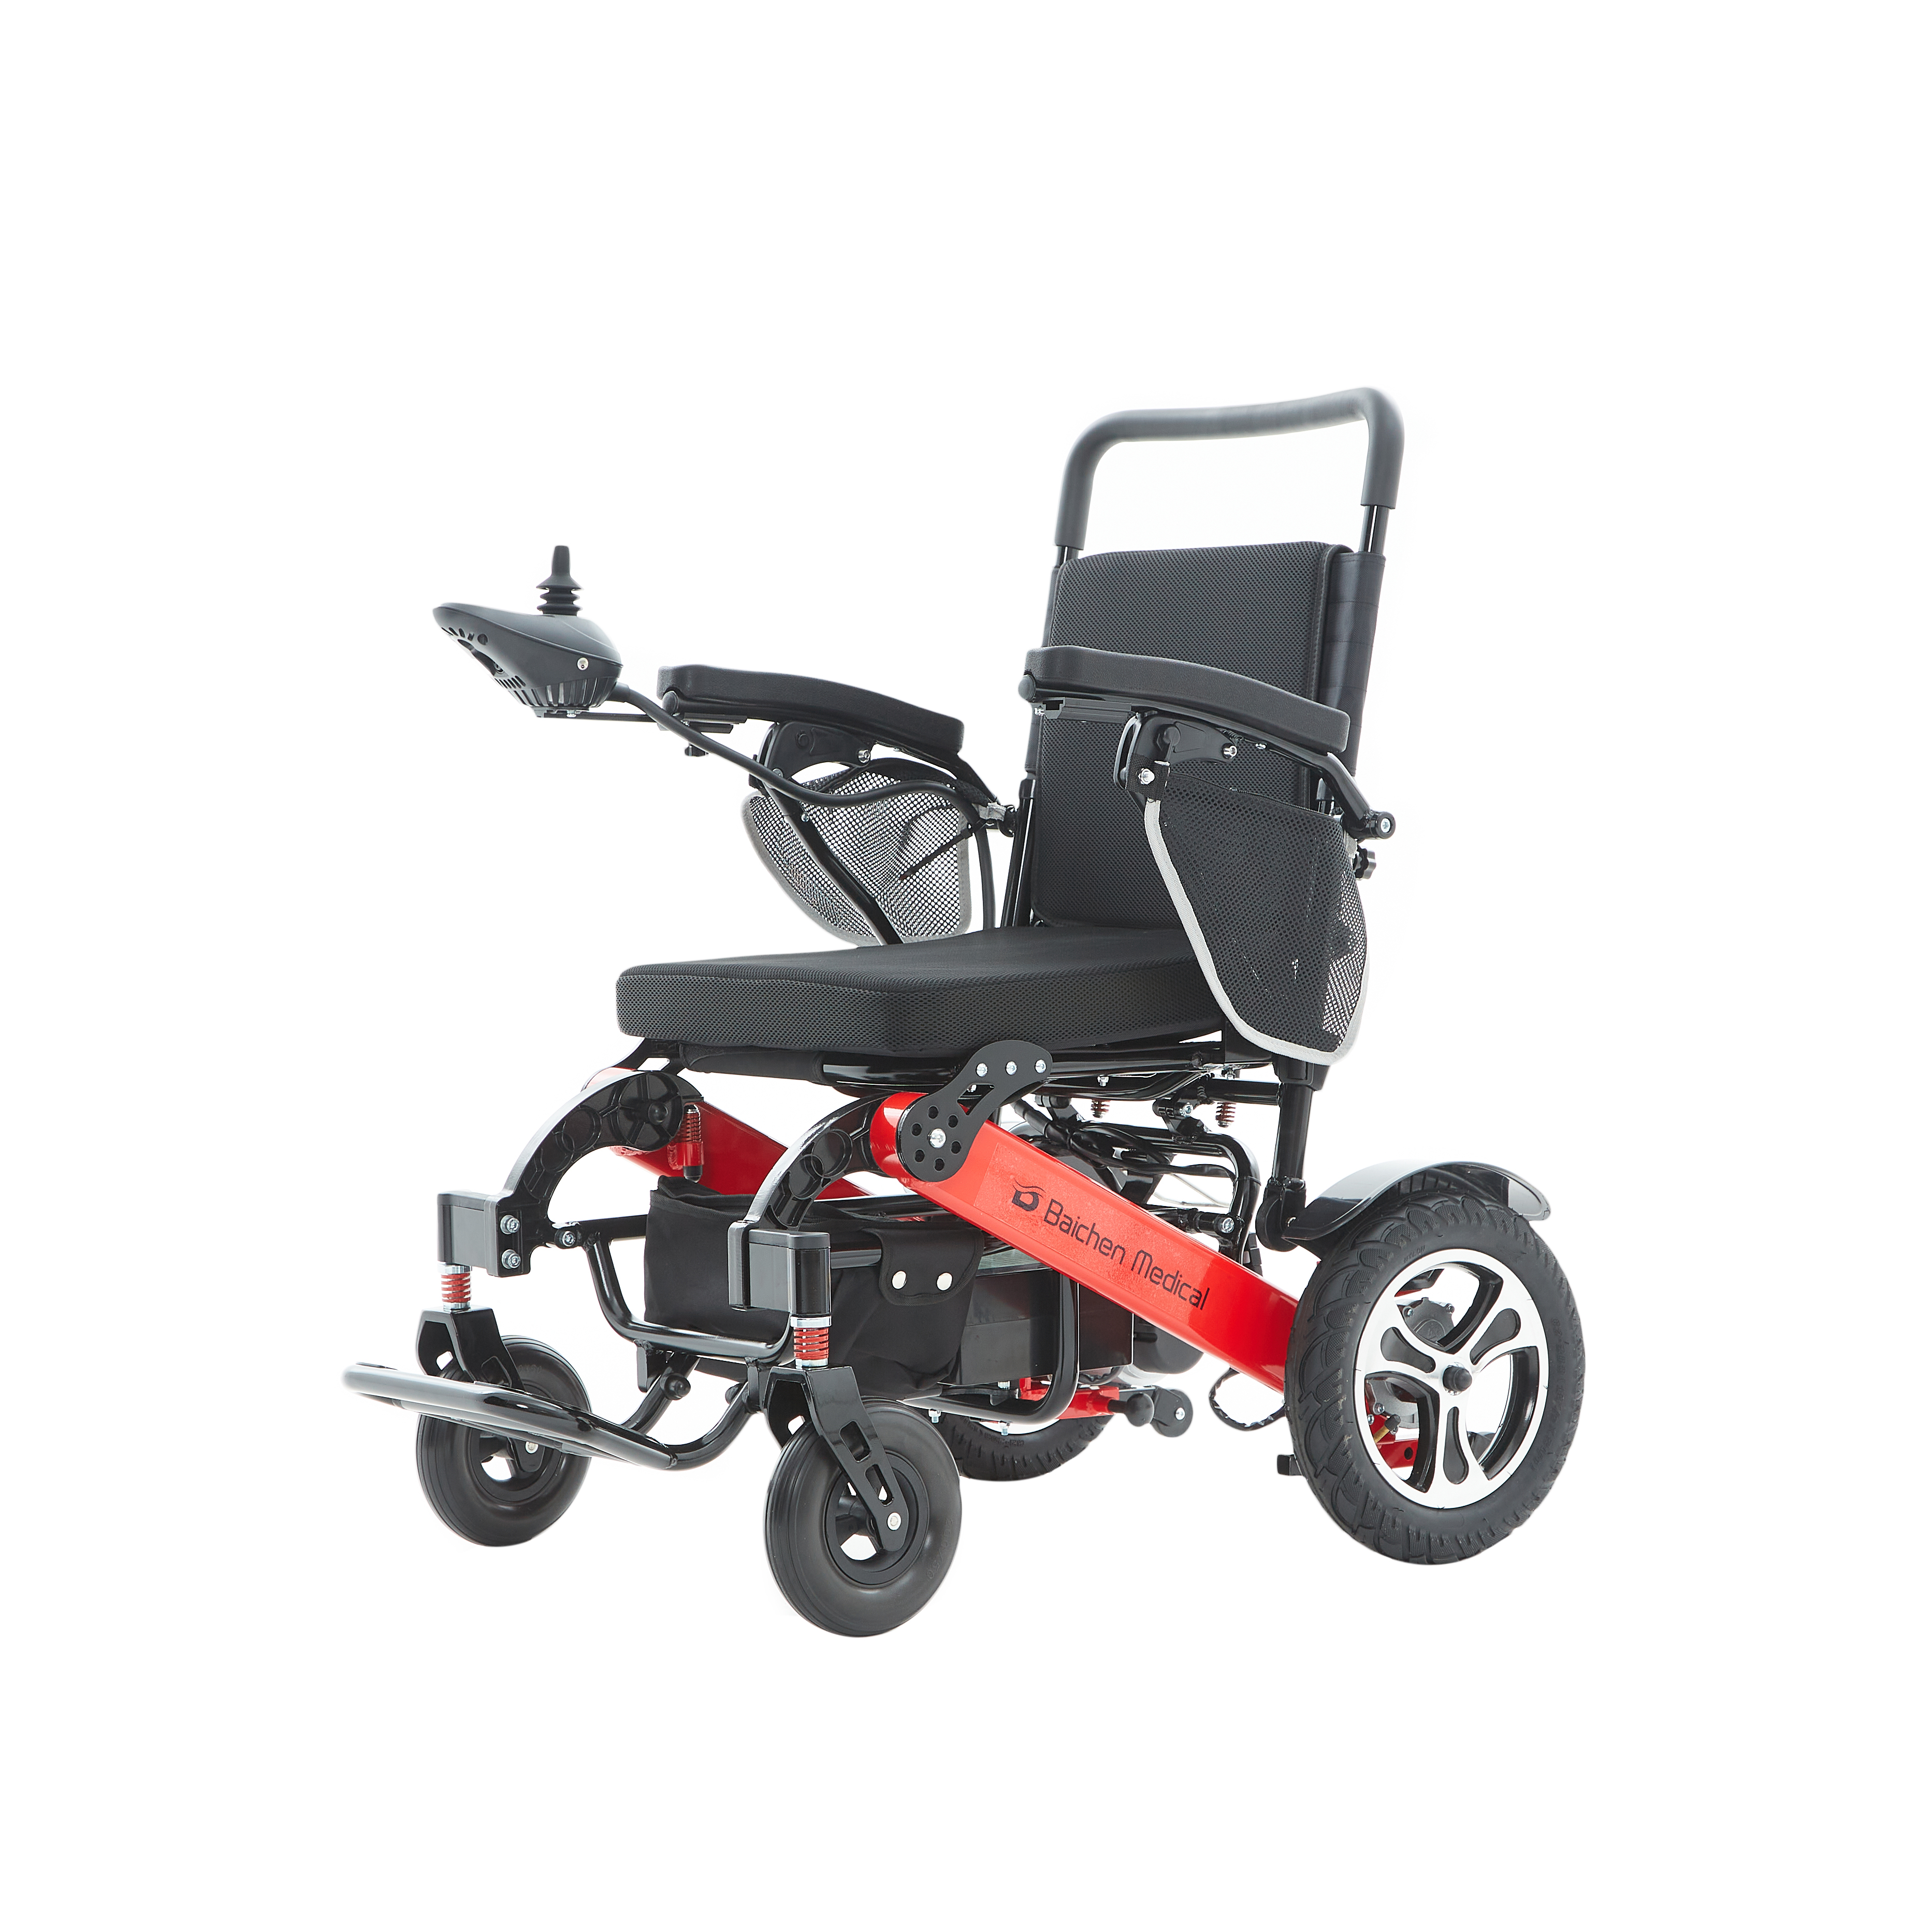 Baichen Hot Selling Electric Wheelchair, BC-EA8000-Red&Black Featured Image